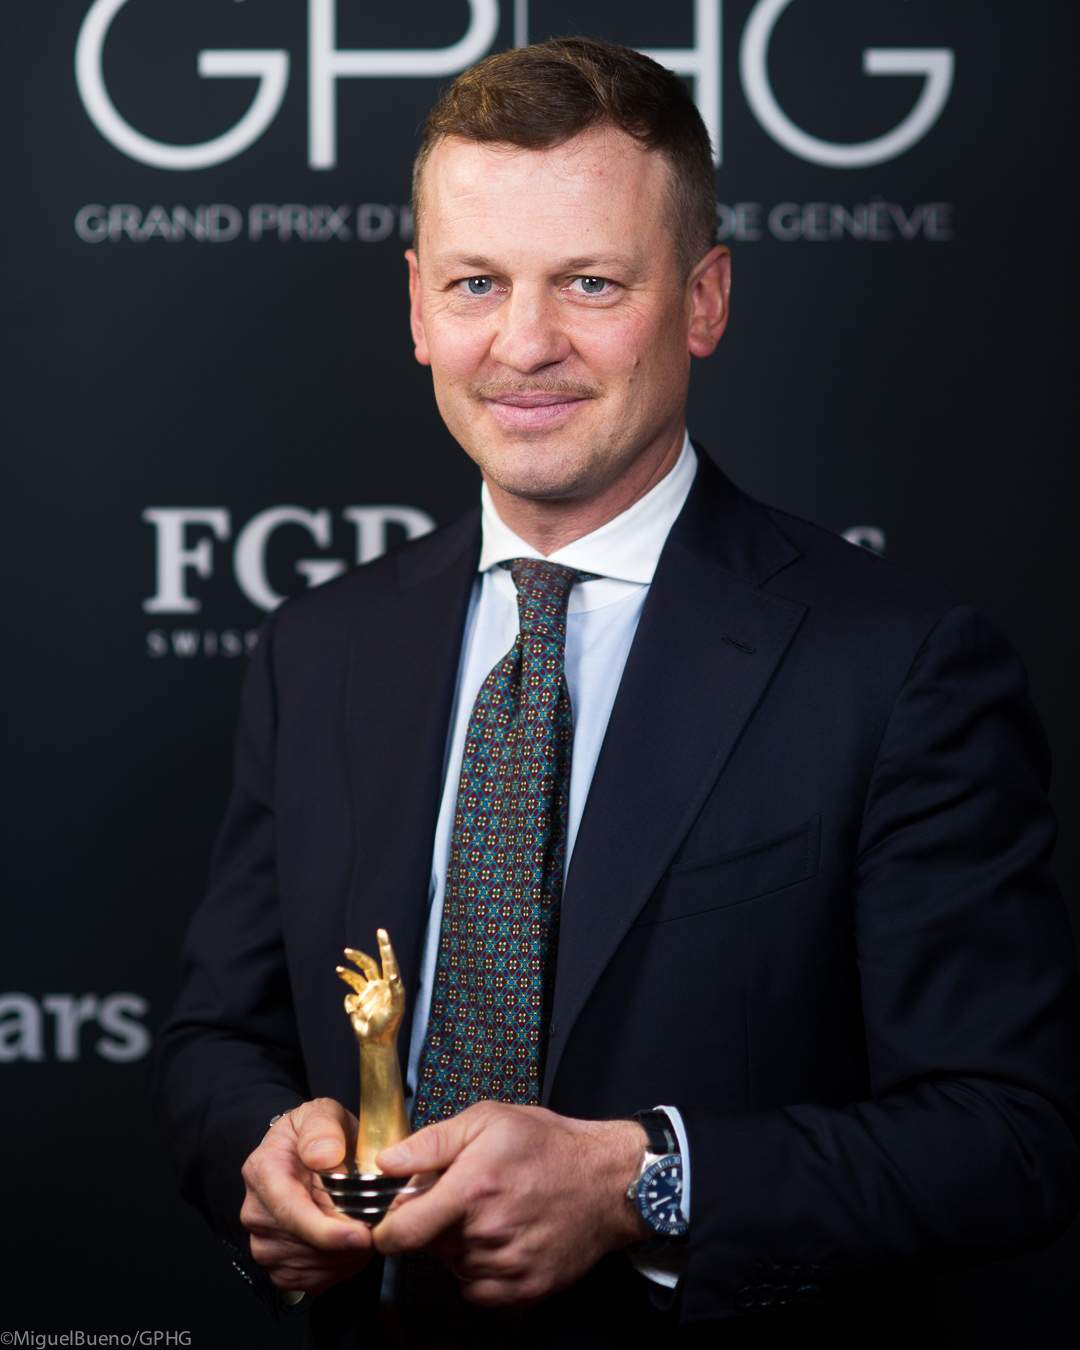 Christophe Chevalier, Head of Public Relations of Tudor, winner of the Diver’s Watch Prize 2022